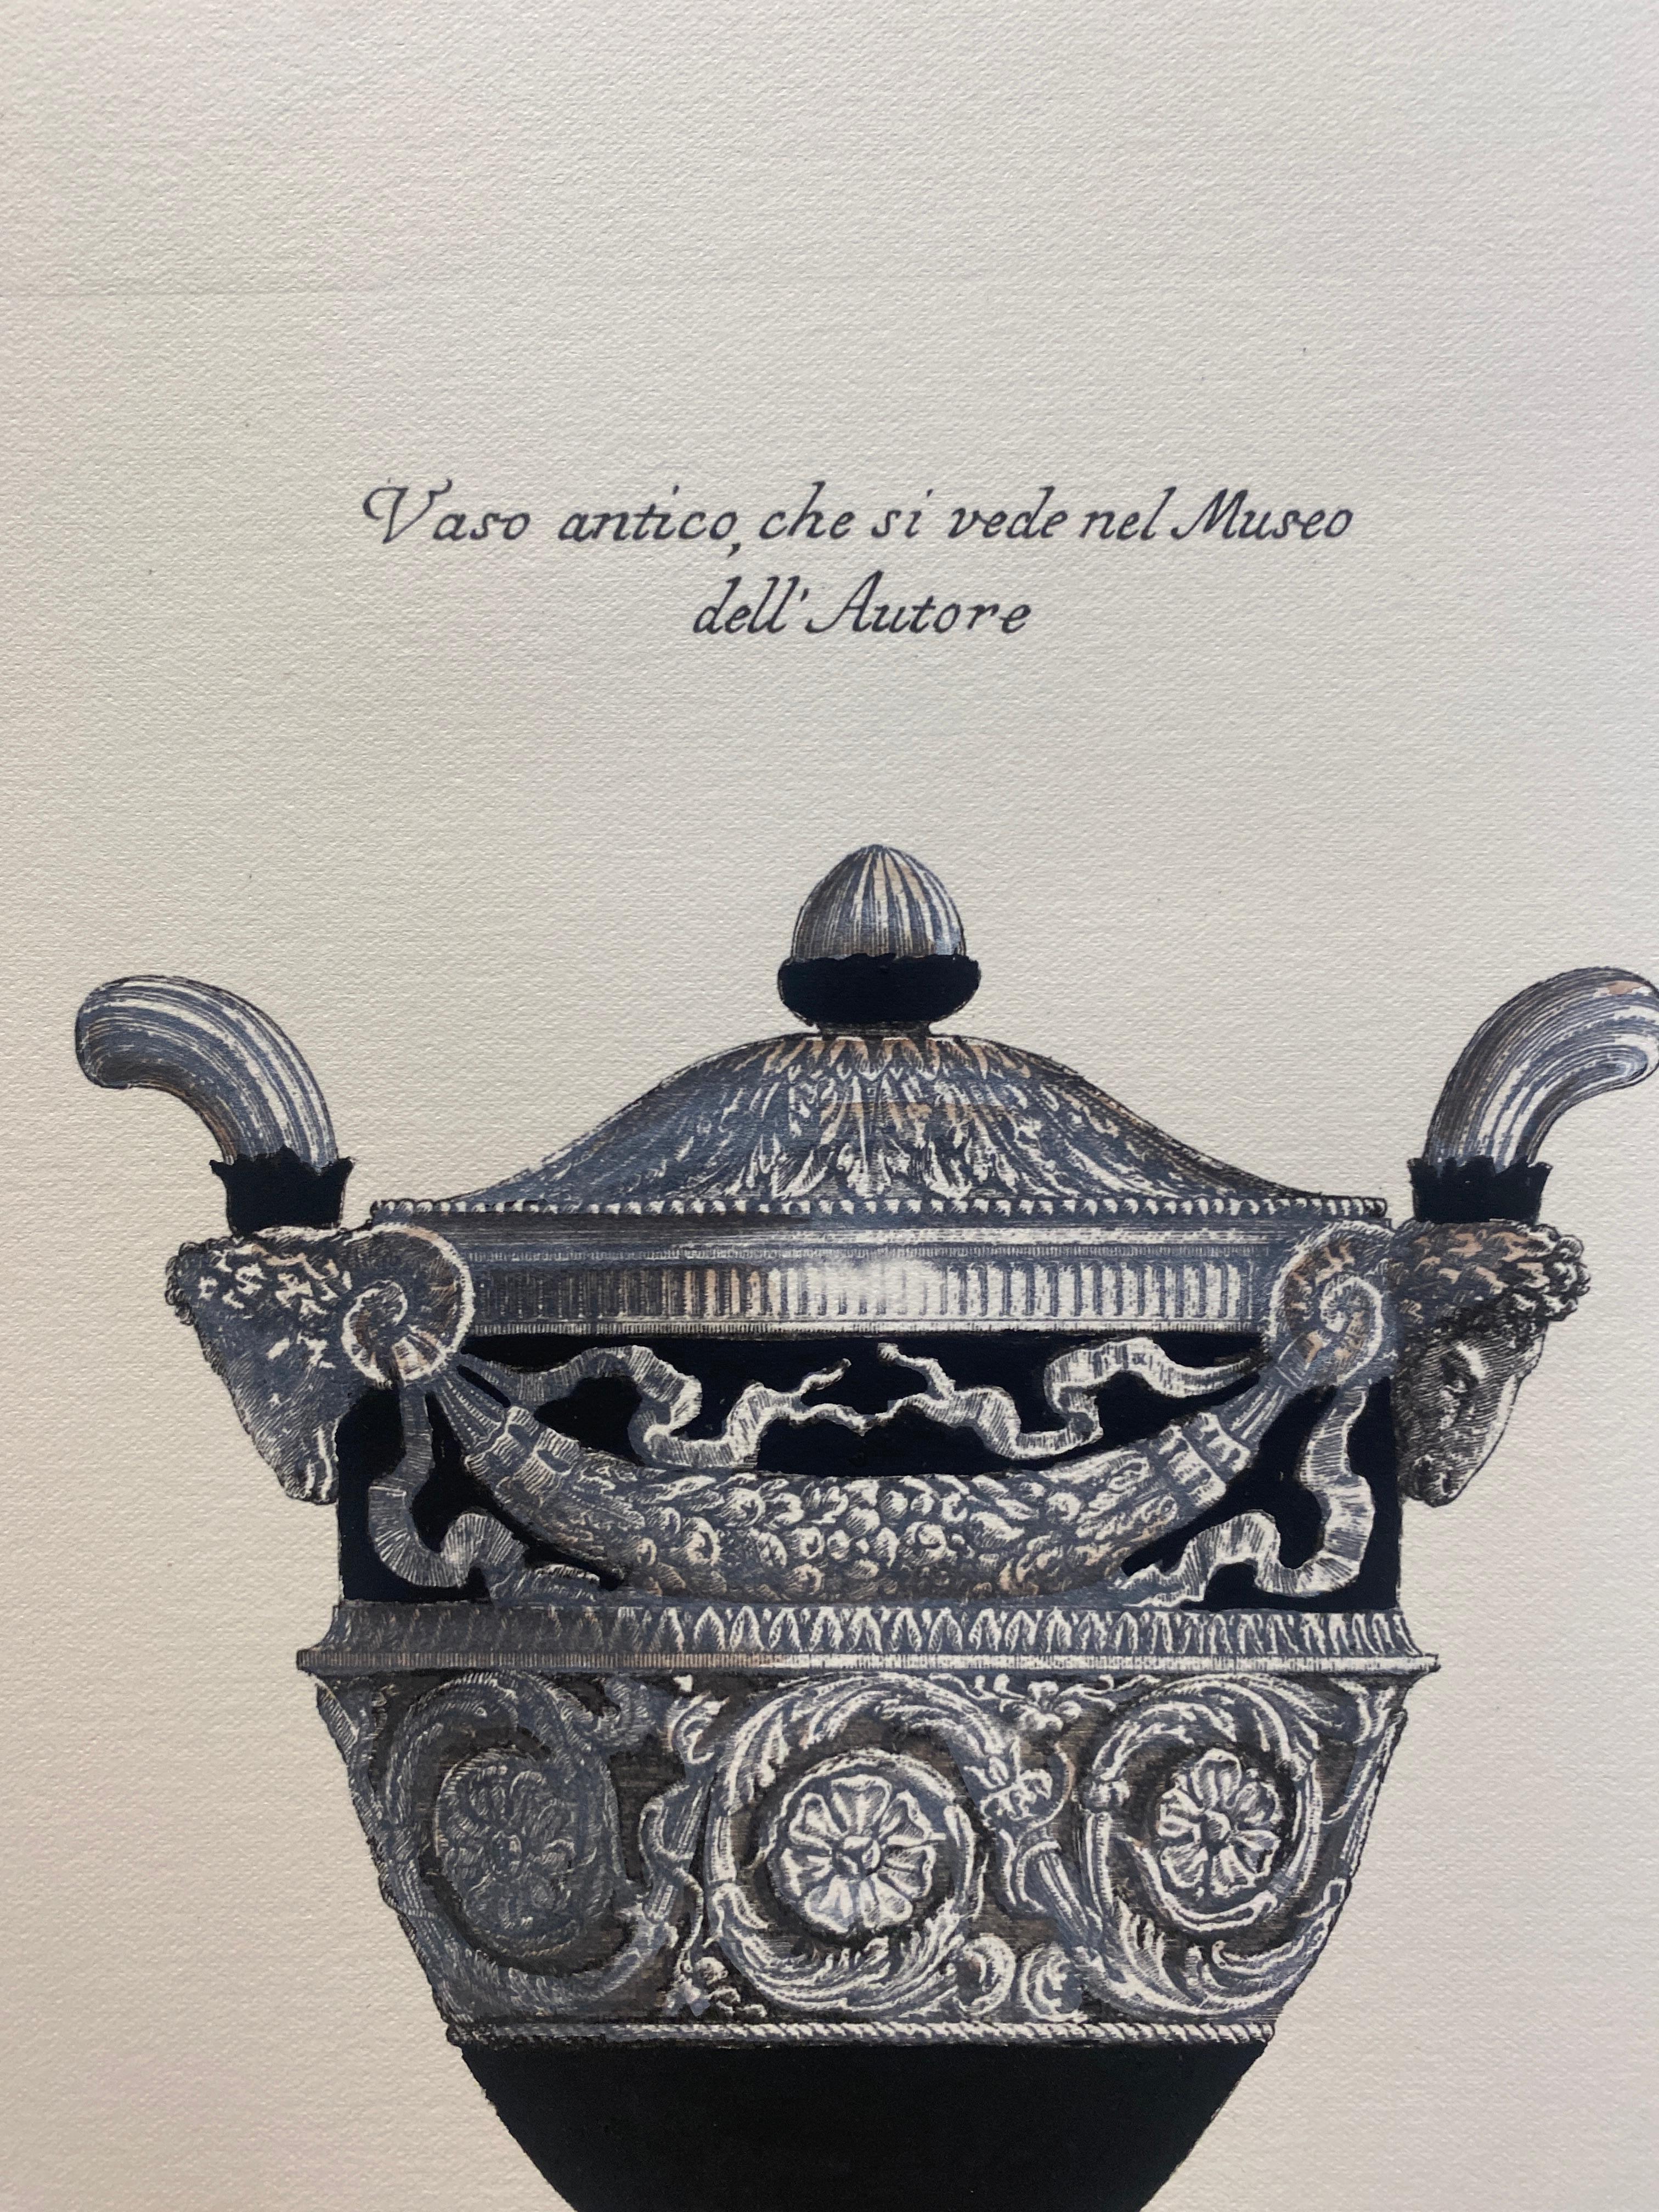 Very original reproductions of decorative vases from important English mansions, printed on a hand press on 100% cotton engraving paper.
Completely handpainted with a cream wash, umber highlights, and matte black details.

Available in five